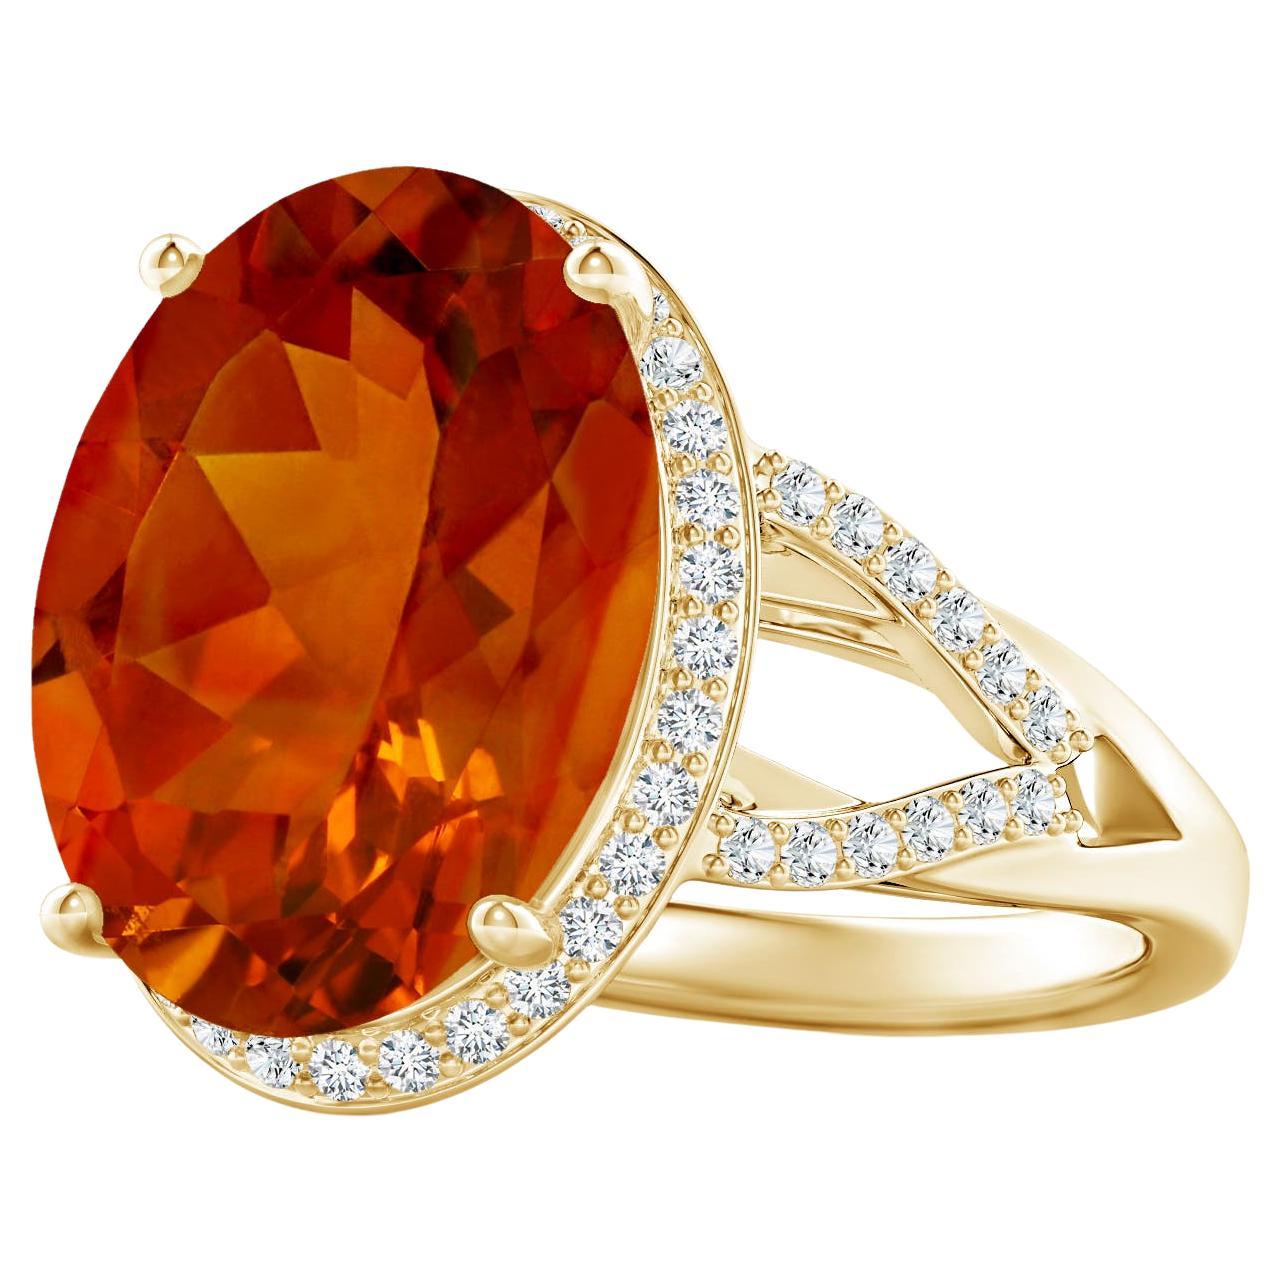 For Sale:  GIA Certified Natural Citrine Ring in Yellow Gold with Diamond Accents